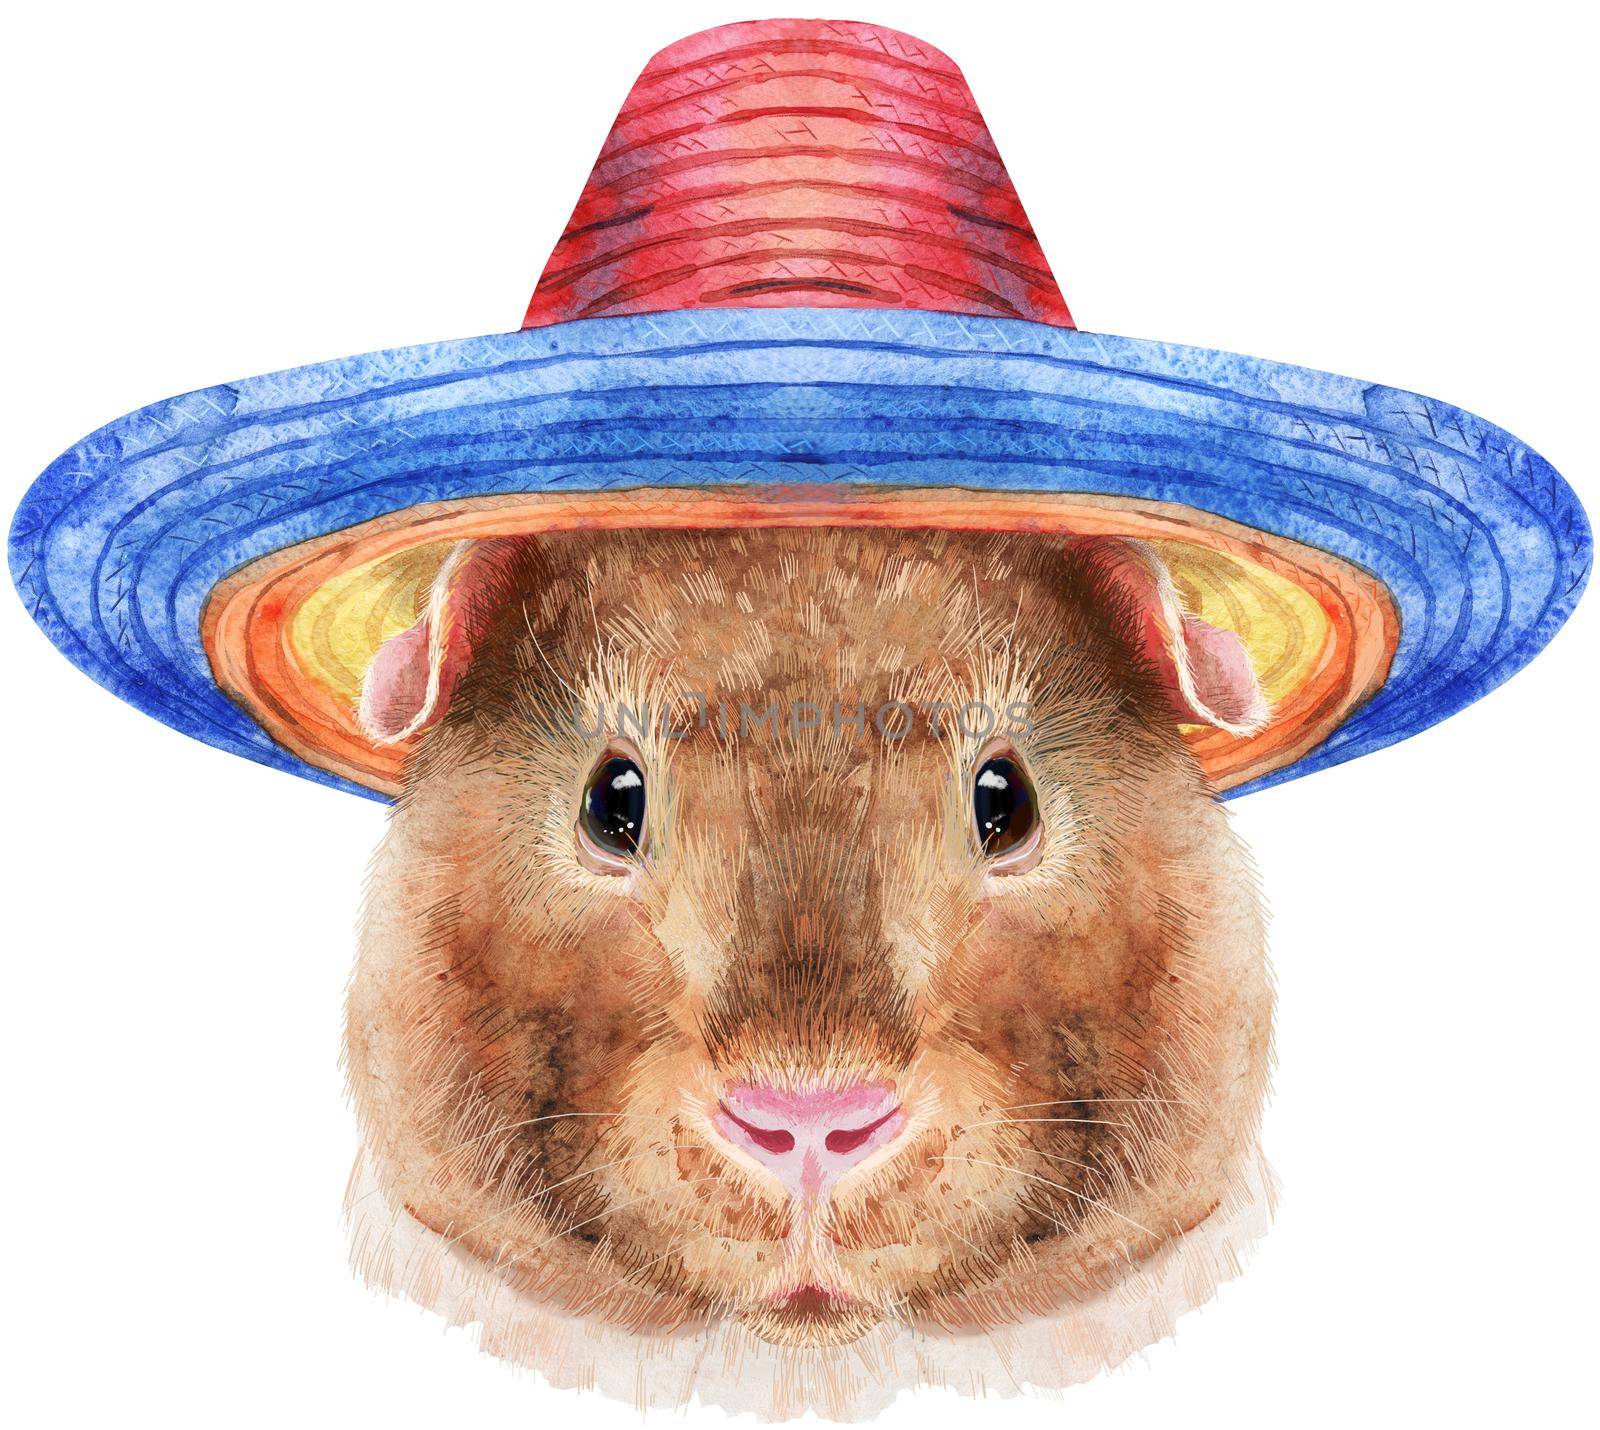 Guinea pig in sombrero. Pig for T-shirt graphics. Watercolor Teddy guinea pig illustration